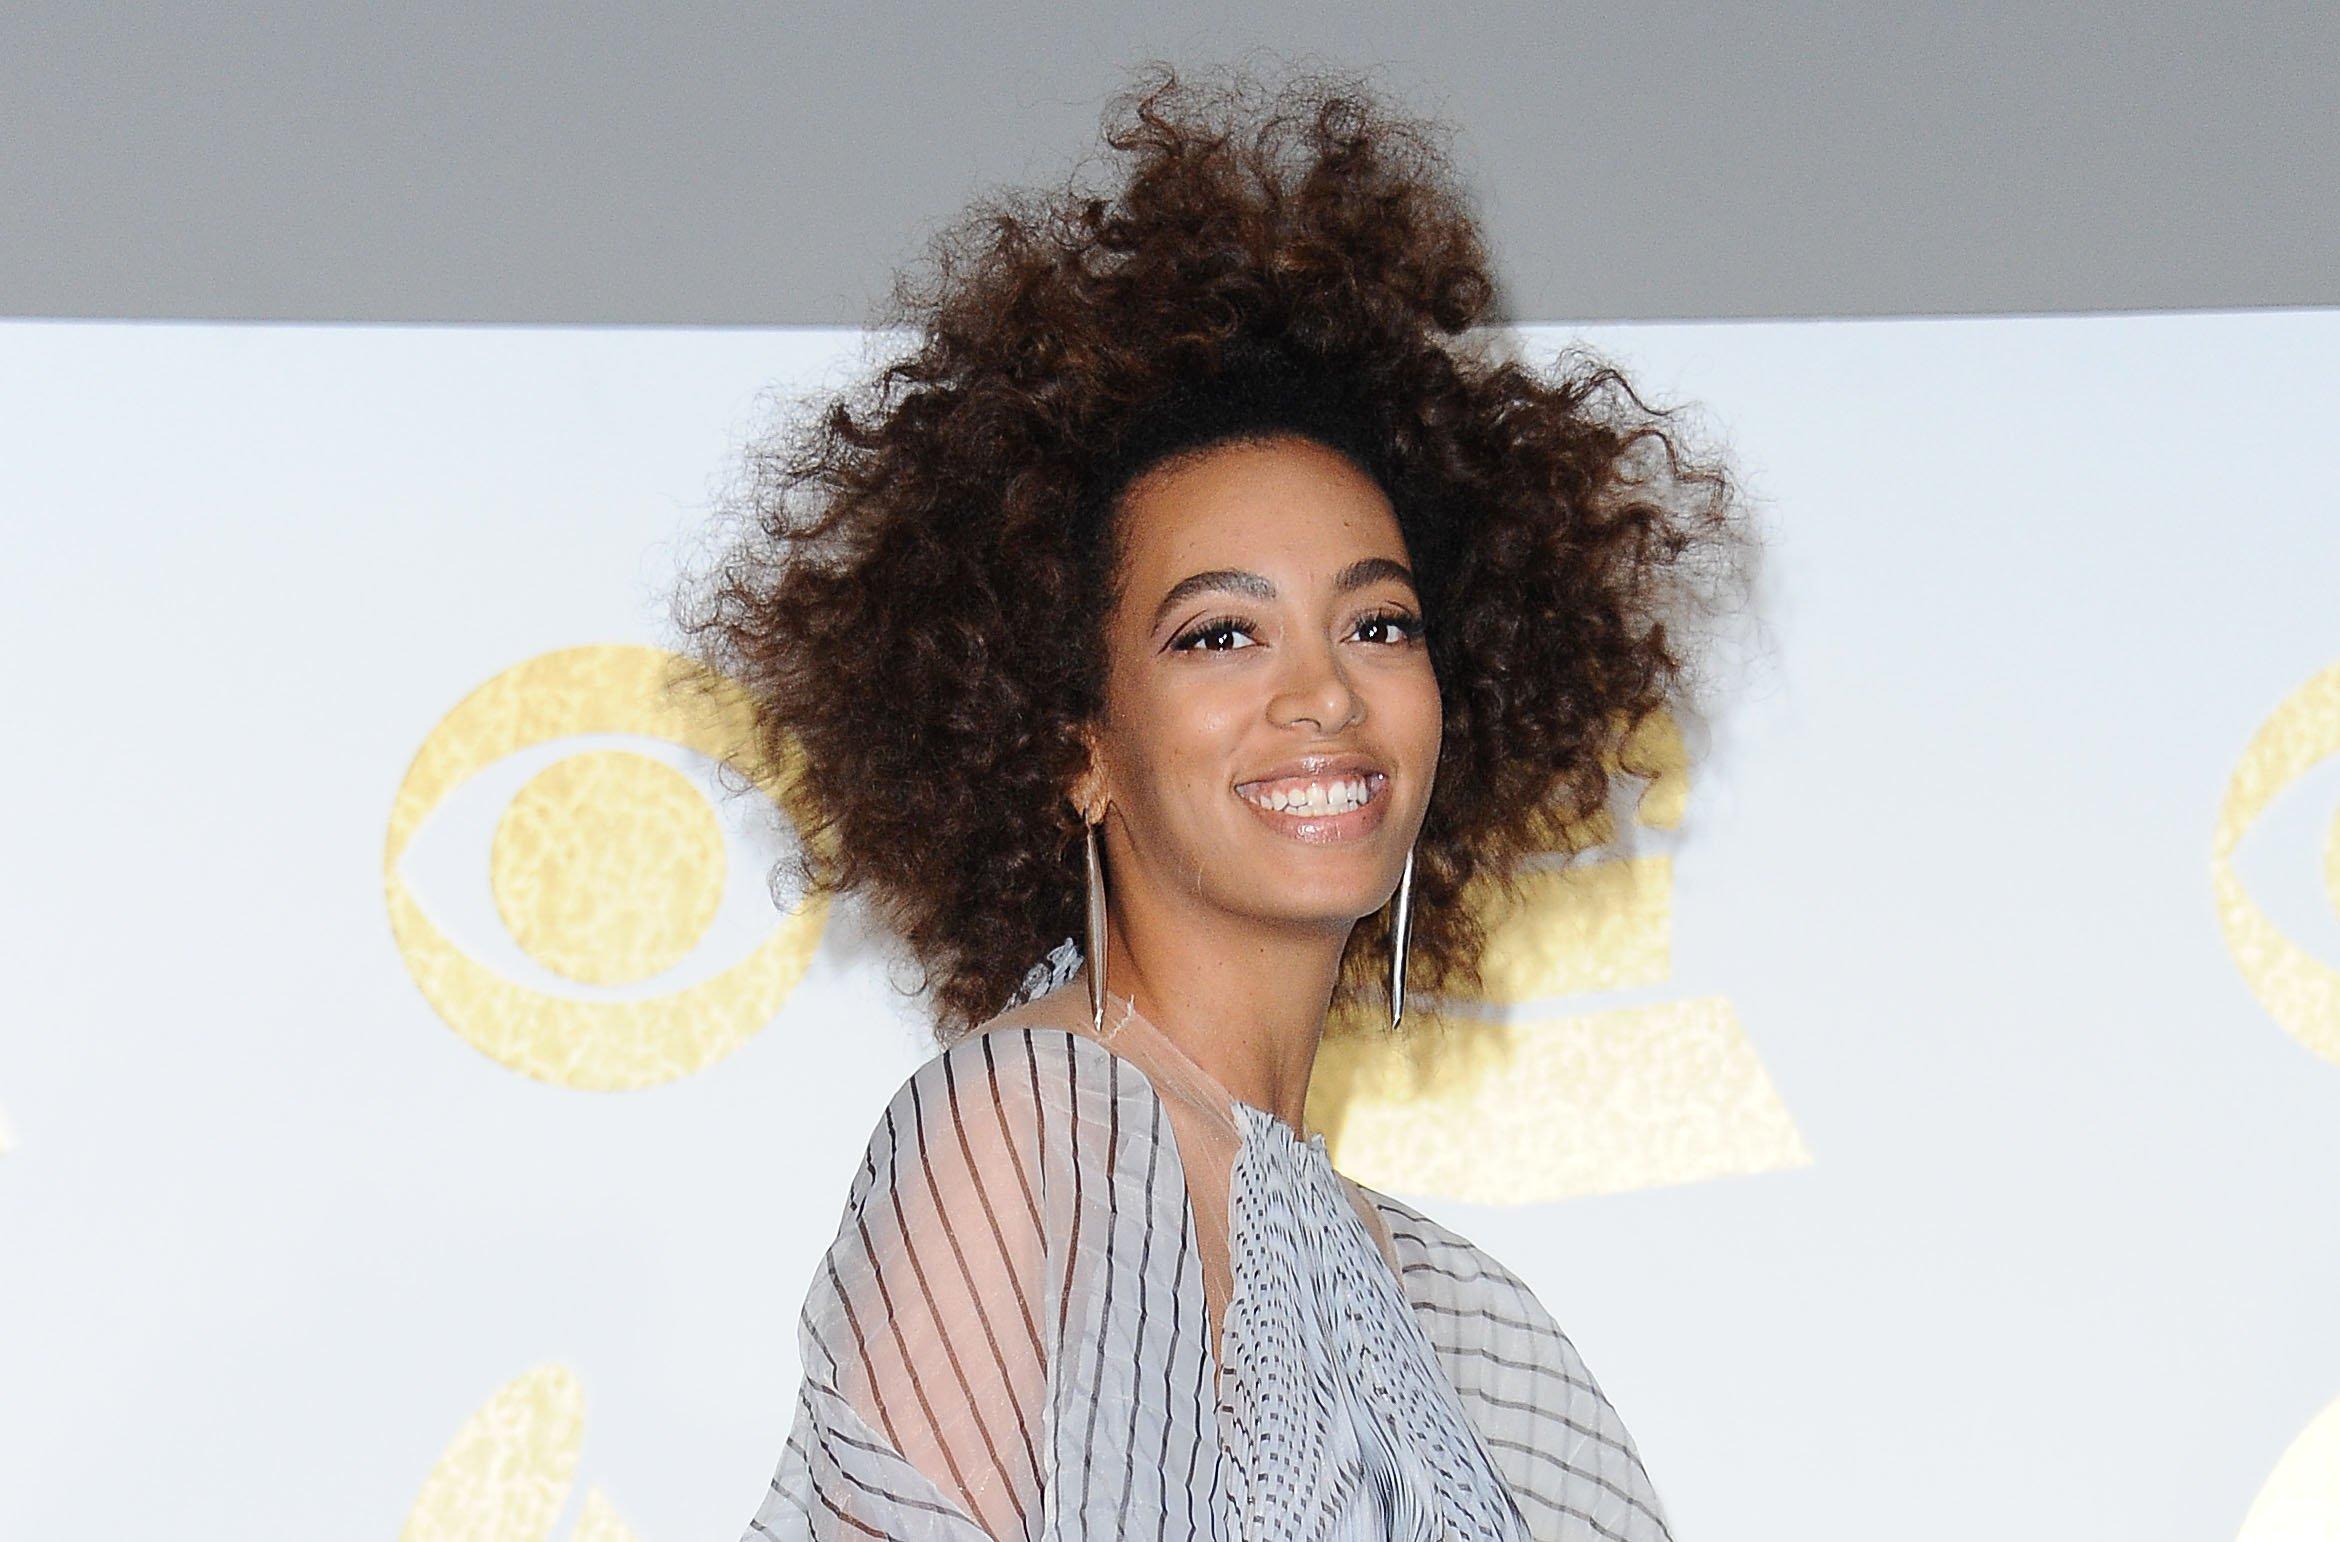 Solange at the 59th GRAMMY Awards in 2017